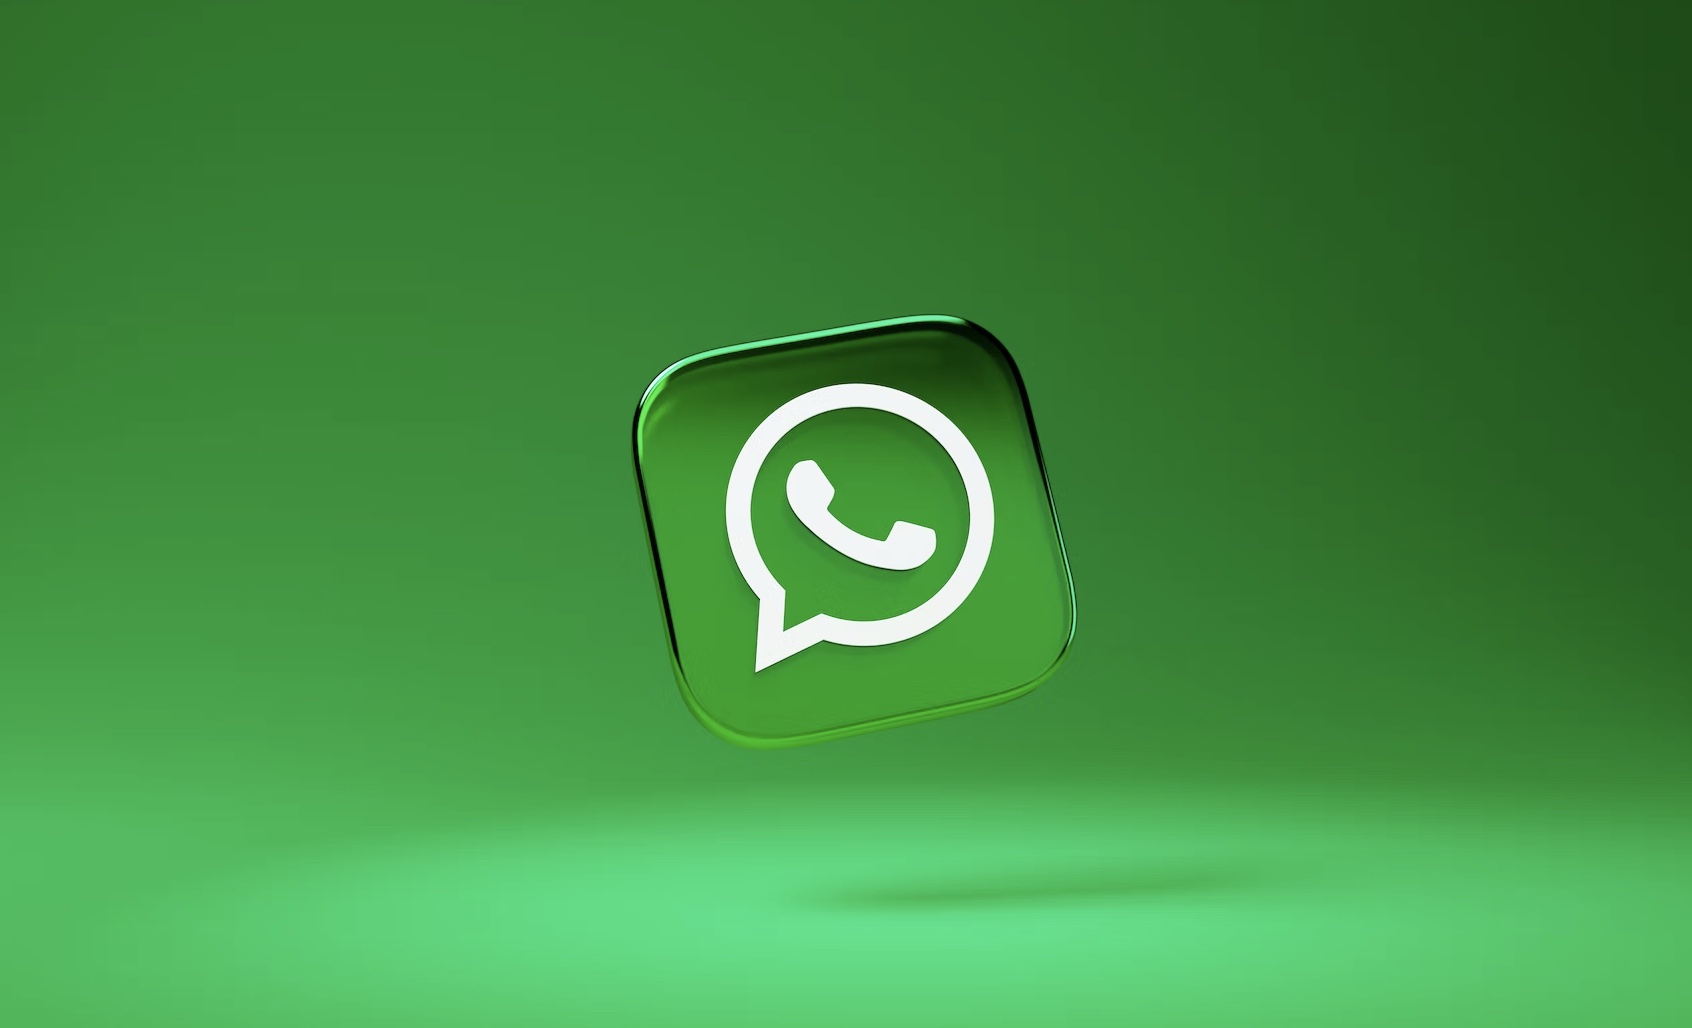 Upcoming WhatsApp feature lets you send photos in HD quality or as ...